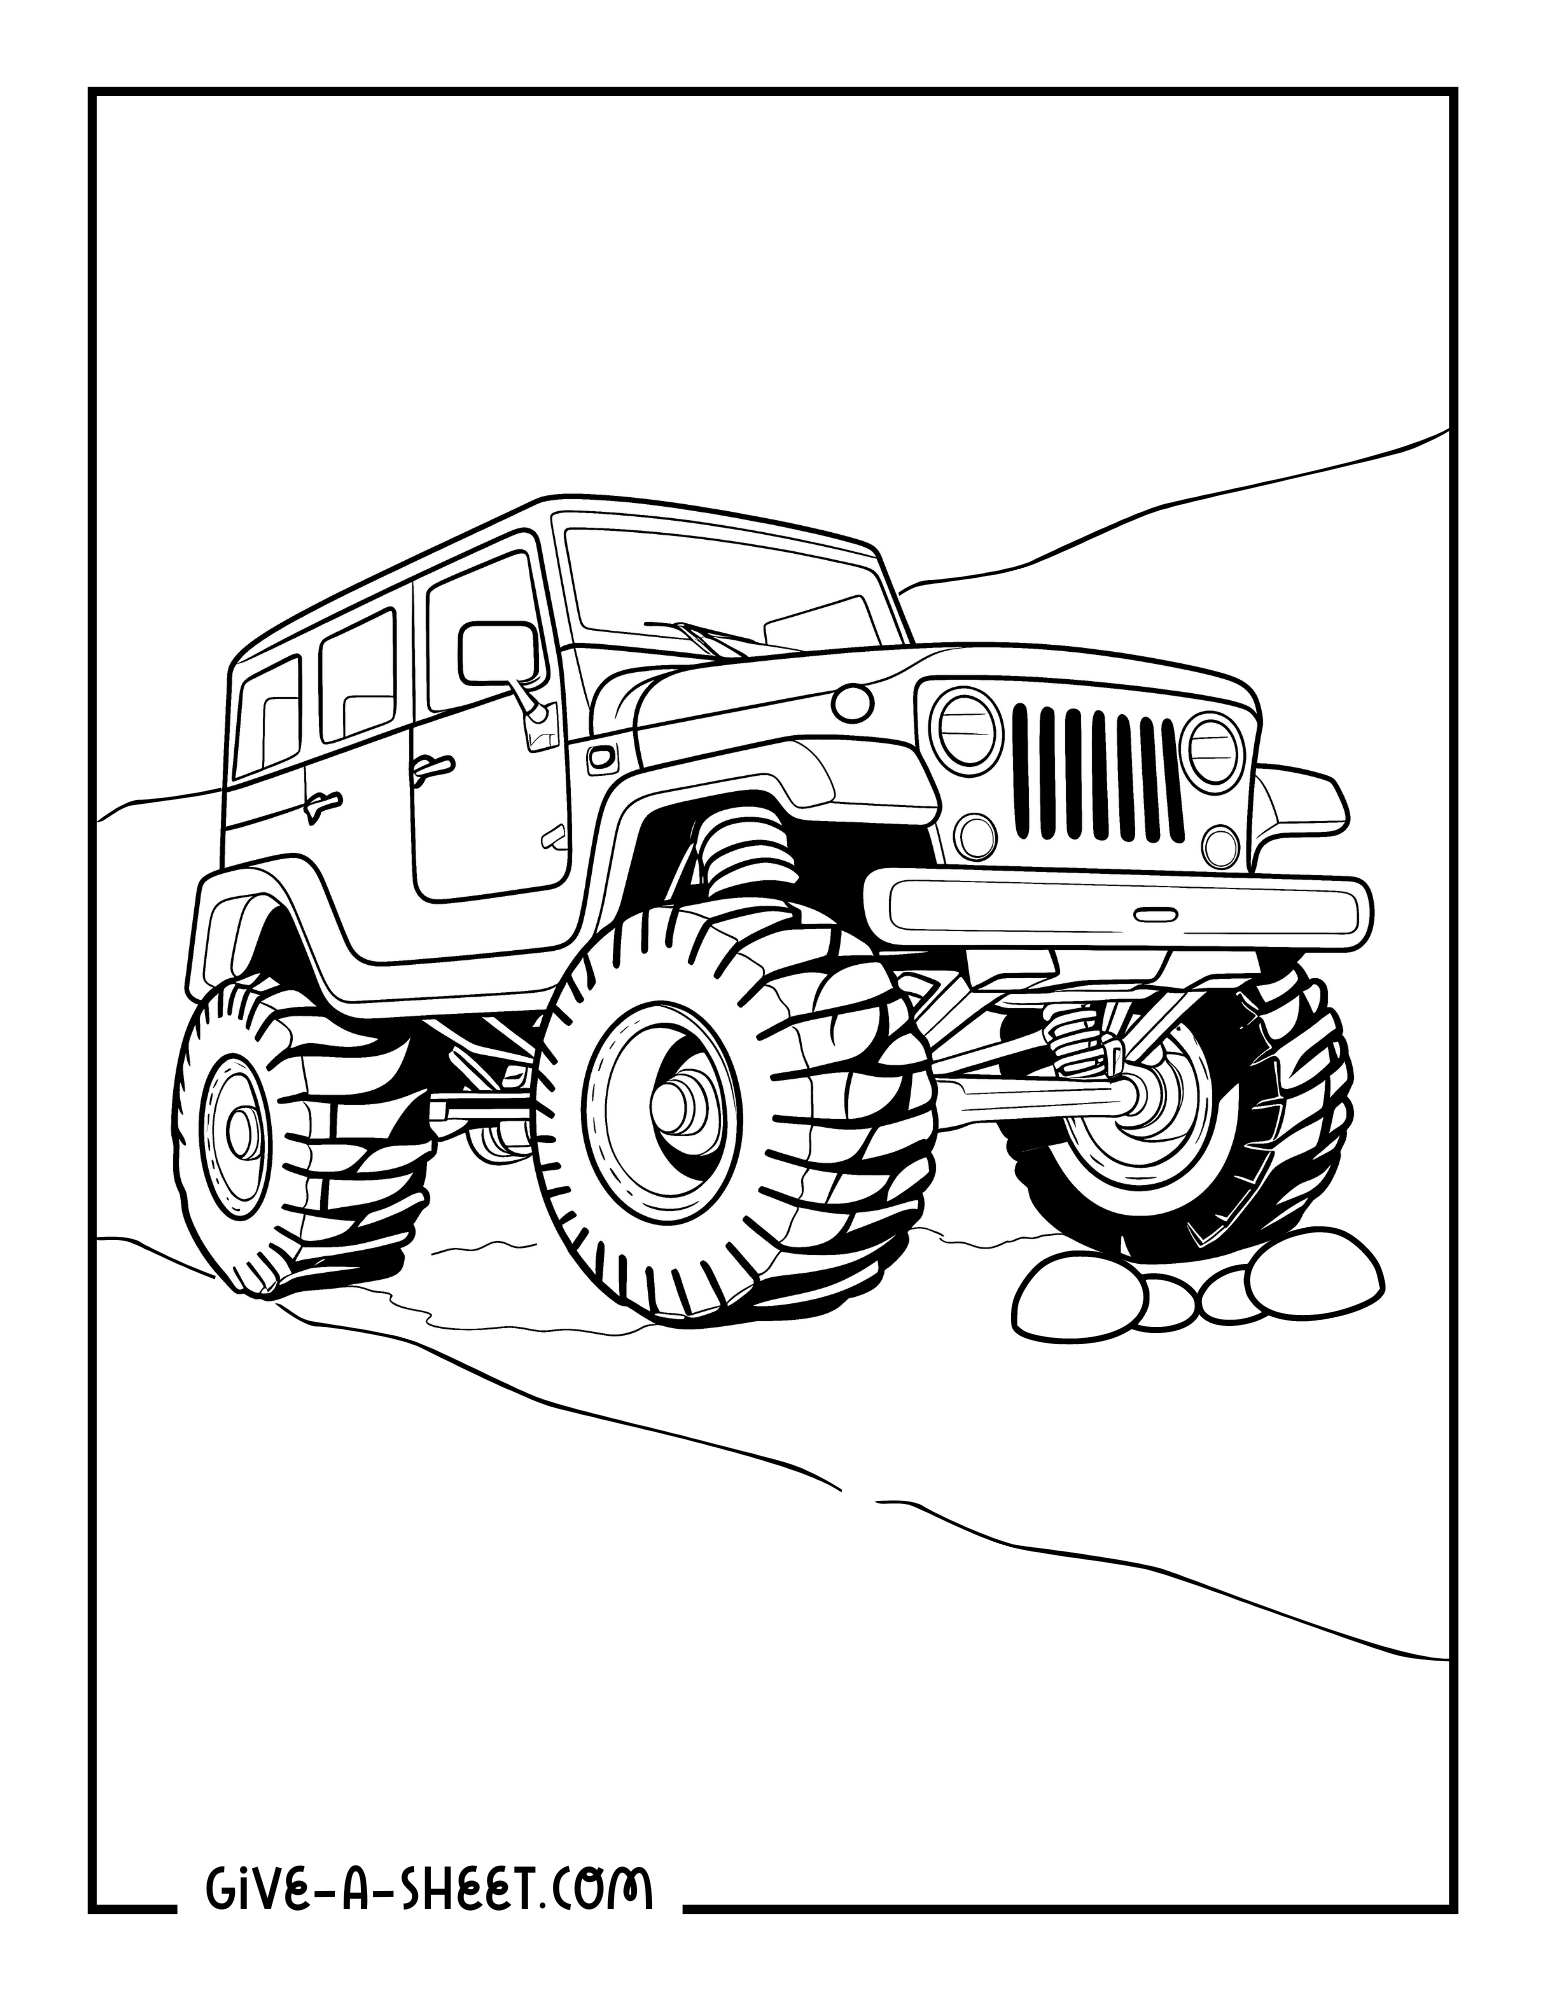 Jeep favorite monster trucks coloring page for kids.